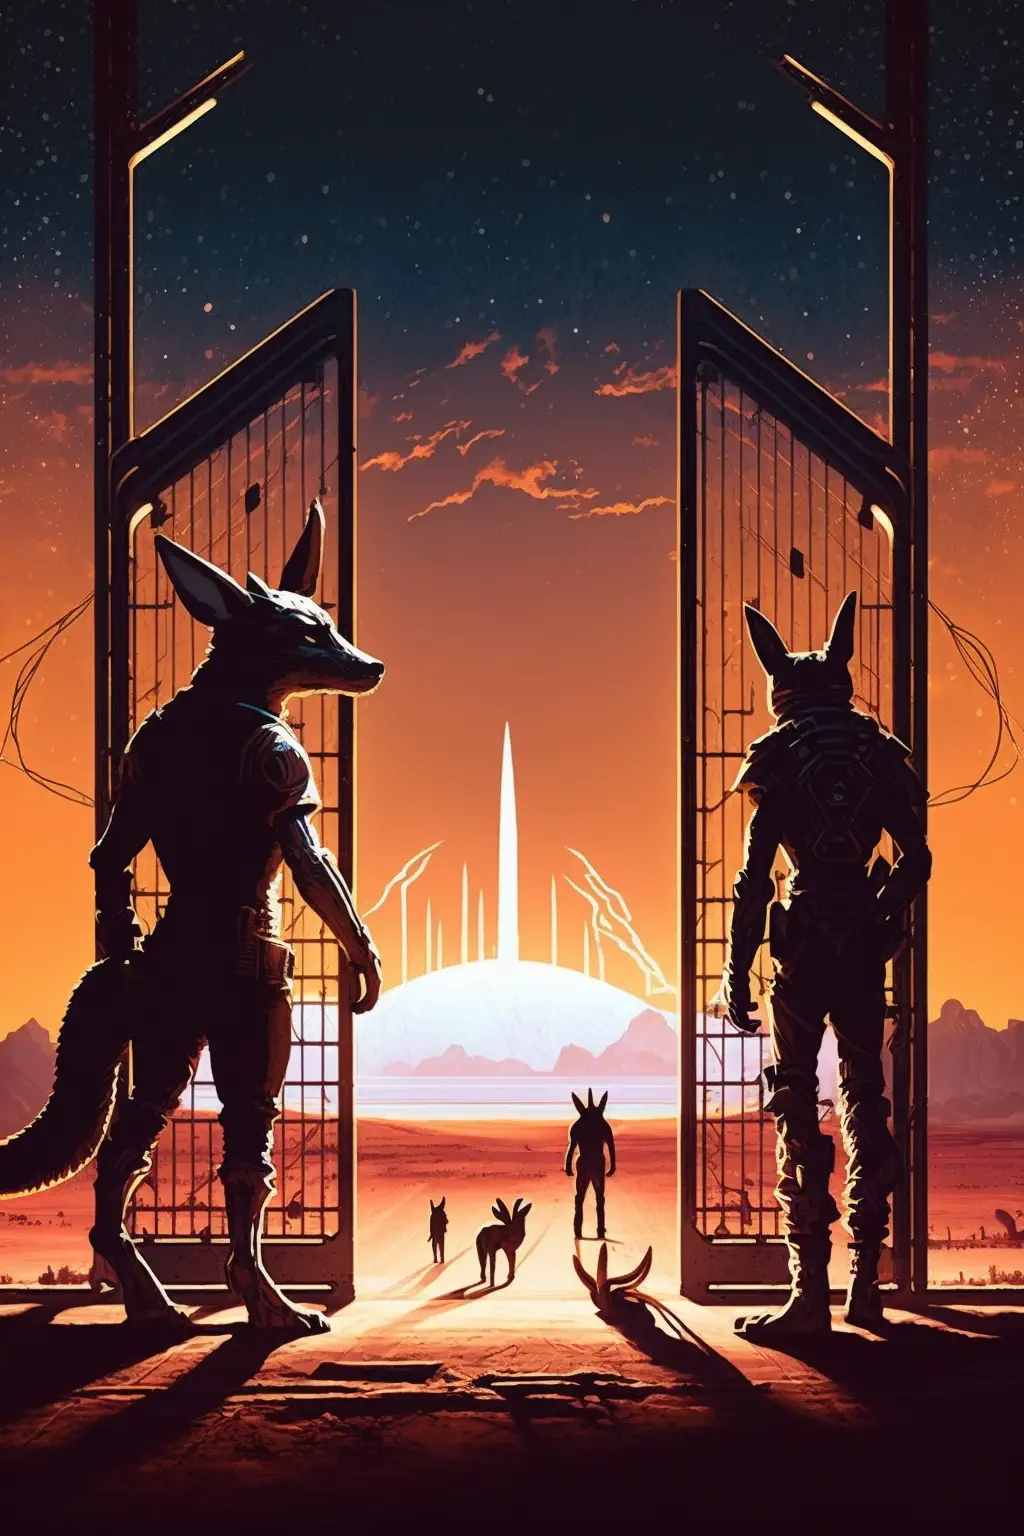 Drak0sha_armed_kangaroo_and_werewolf_are_standing_in_front_of_a_e5f08a66-0255-458c-966b-1f15c11c534c